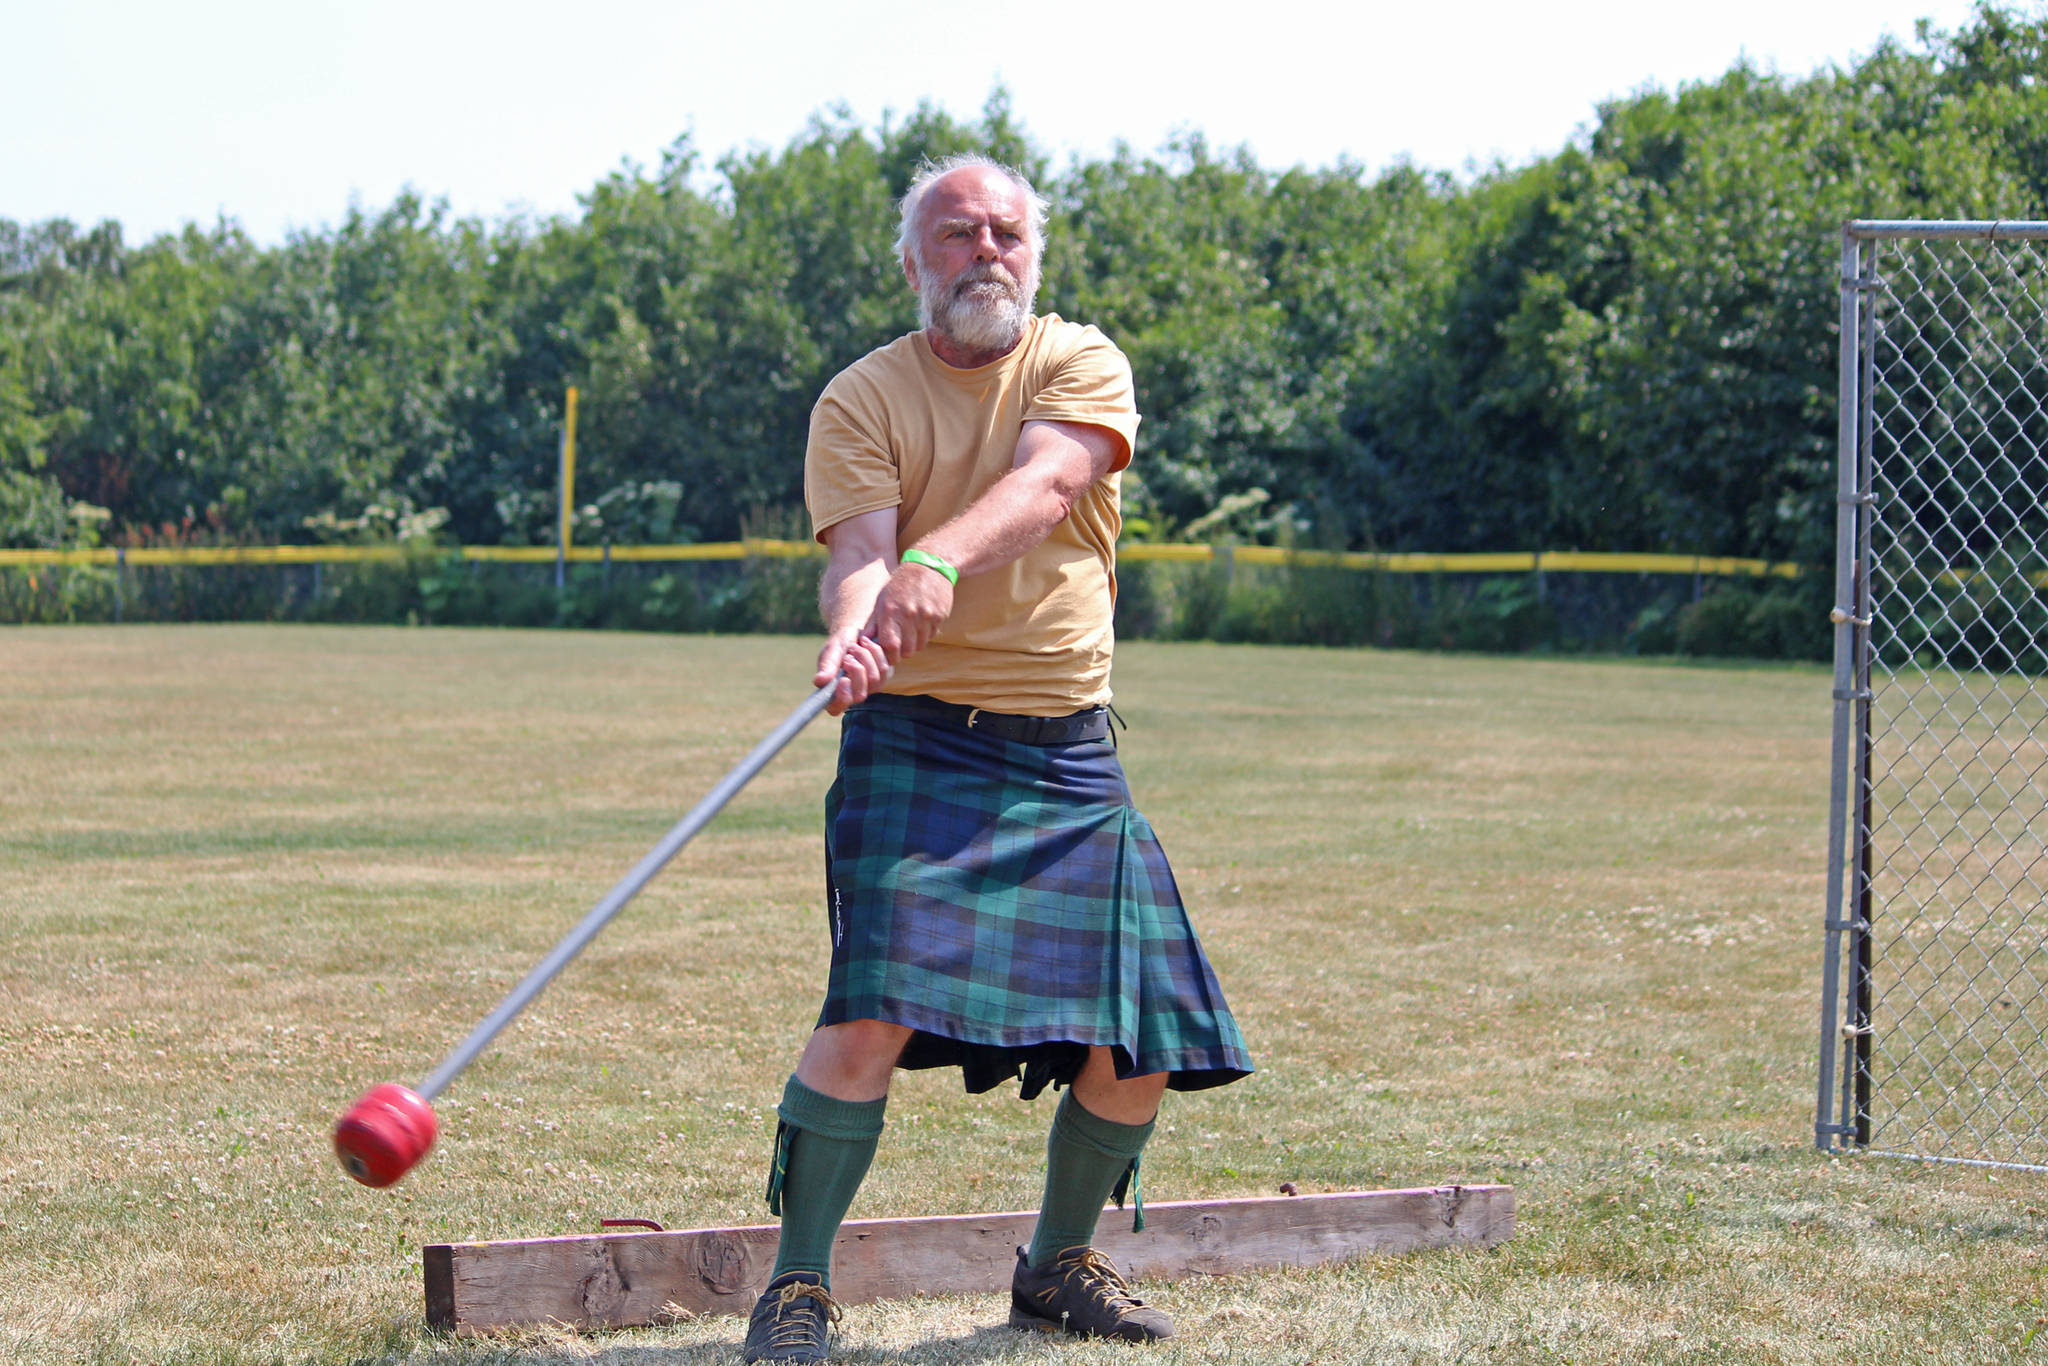 A competitor prepares to throw a hammer in the men’s hammer throw event at the Kachemak Bay Highland Games, held Saturday, July 6, 2019 at Karen Hornaday Park in Homer, Alaska. (Photo by Megan Pacer/Homer News)